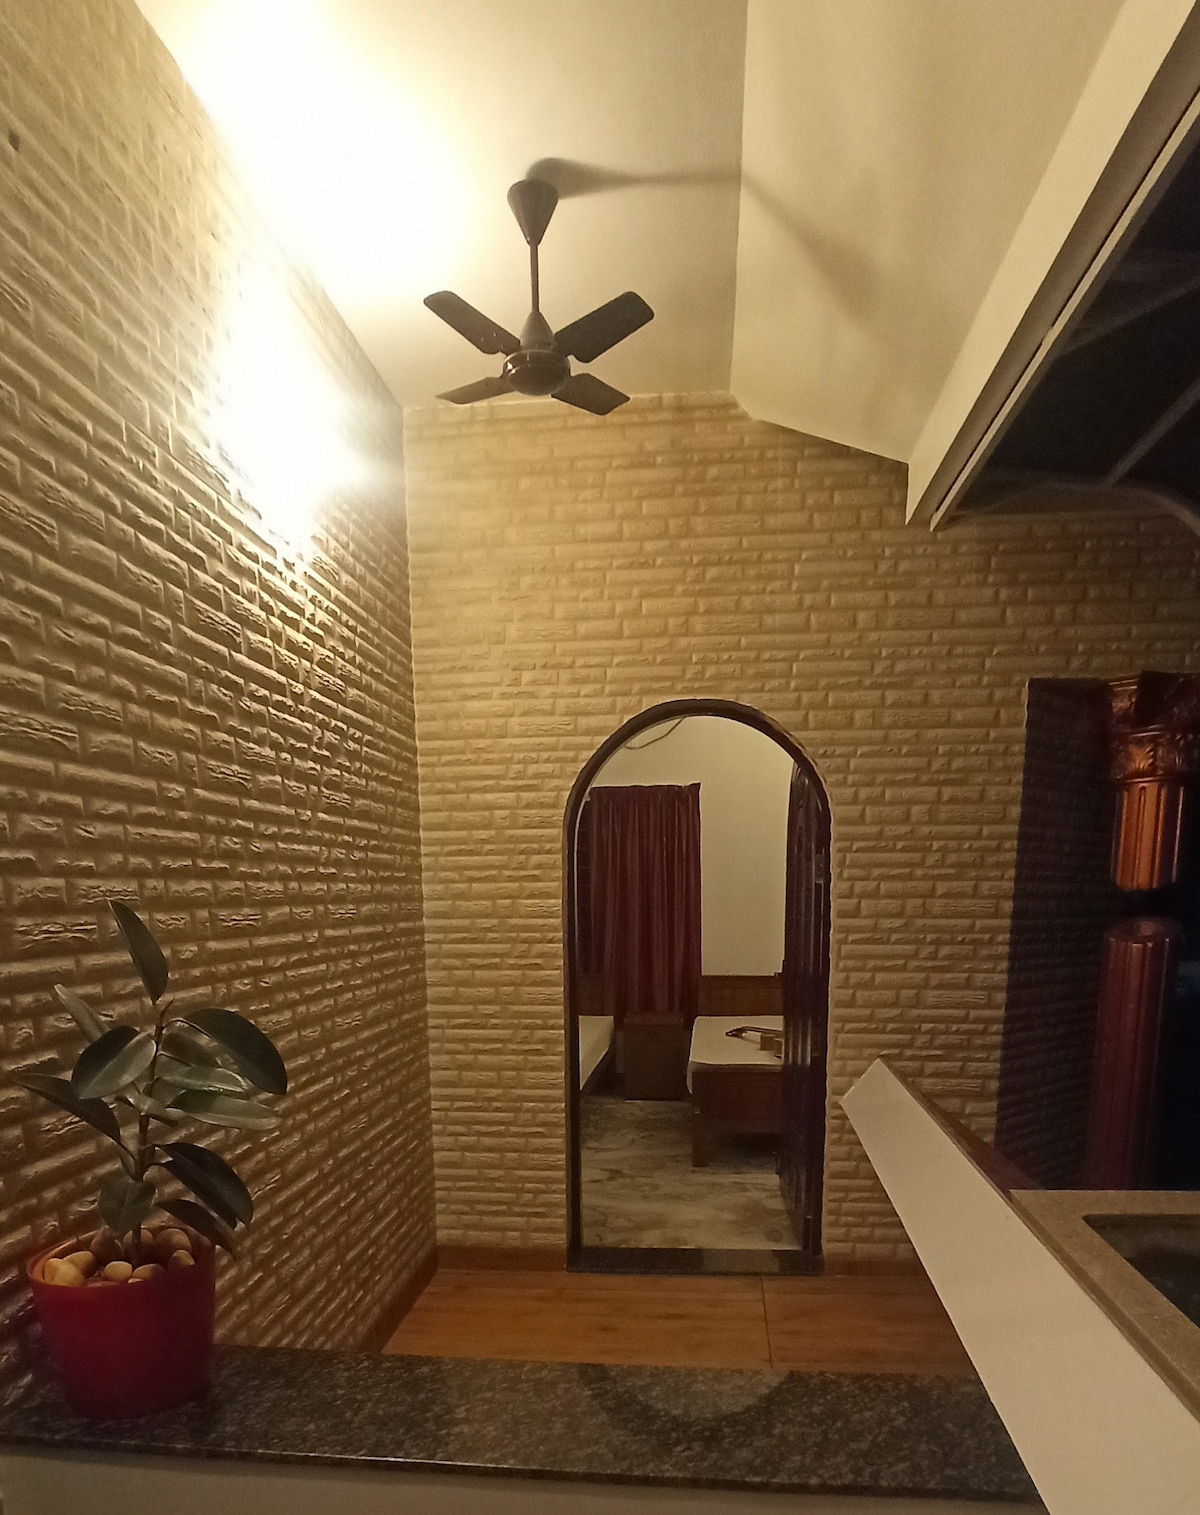 Tranquil Homestay(2 A/C Rooms, Kitchen, Hall etc)